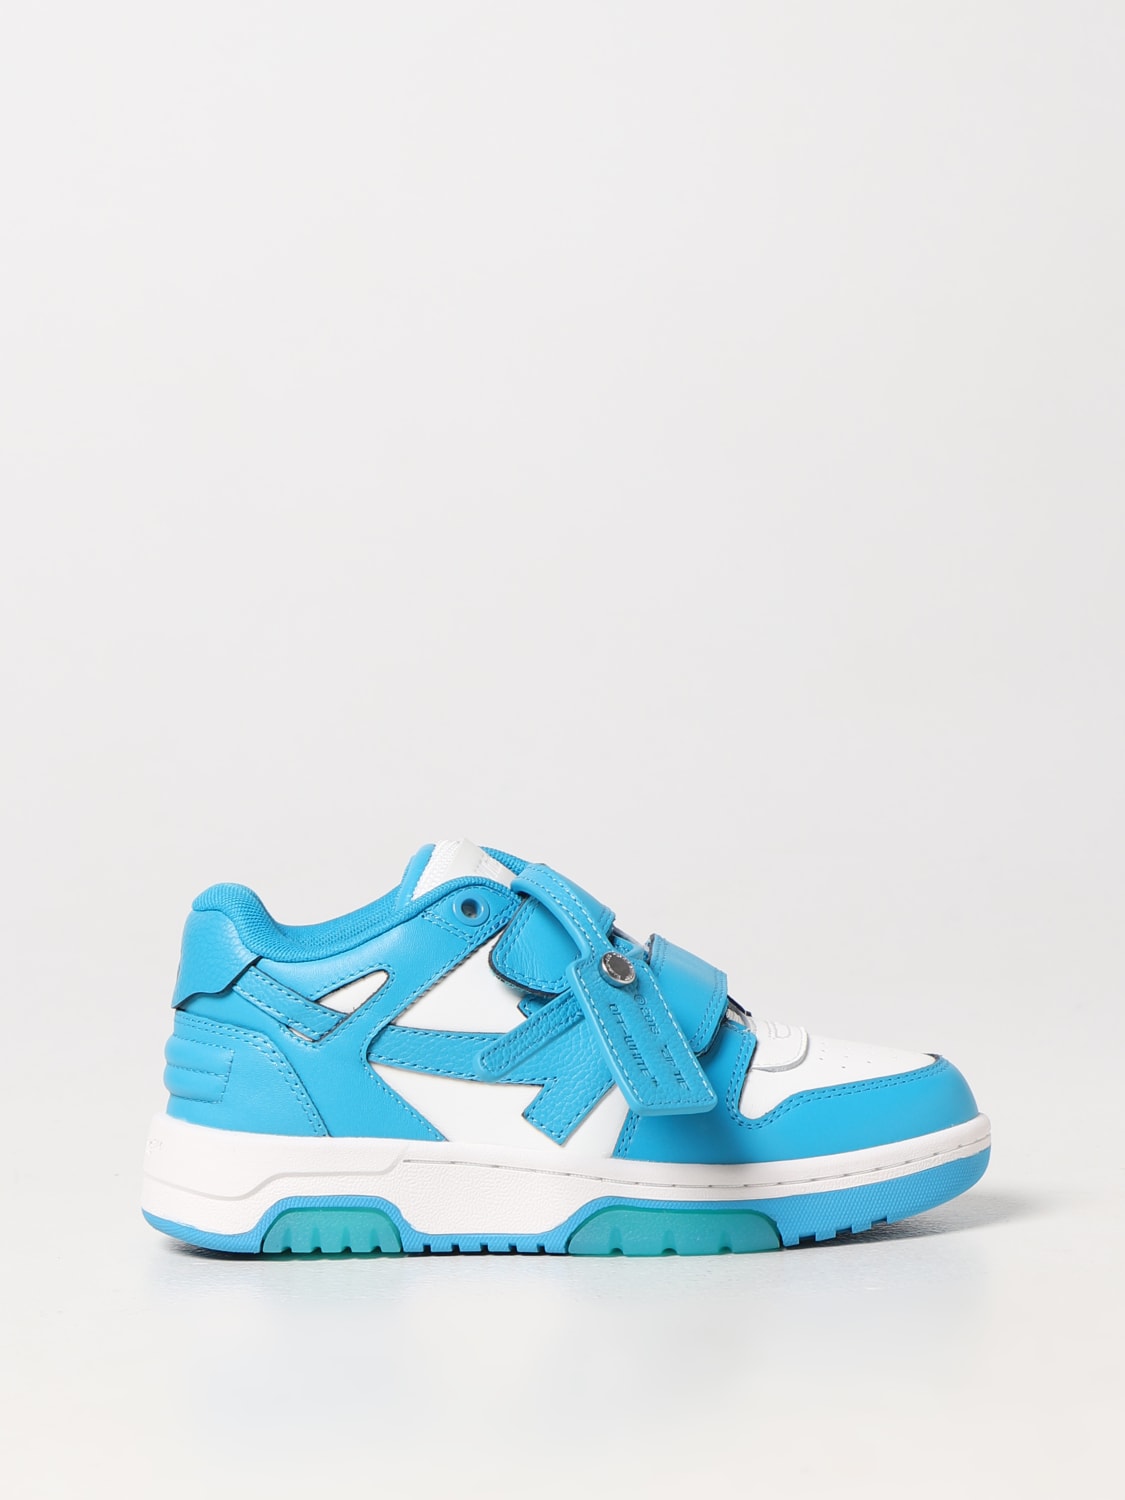 OFF-WHITE: Out Of Office sneakers in leather - Blue | Off-White shoes OBIA008S23LEA001 online on